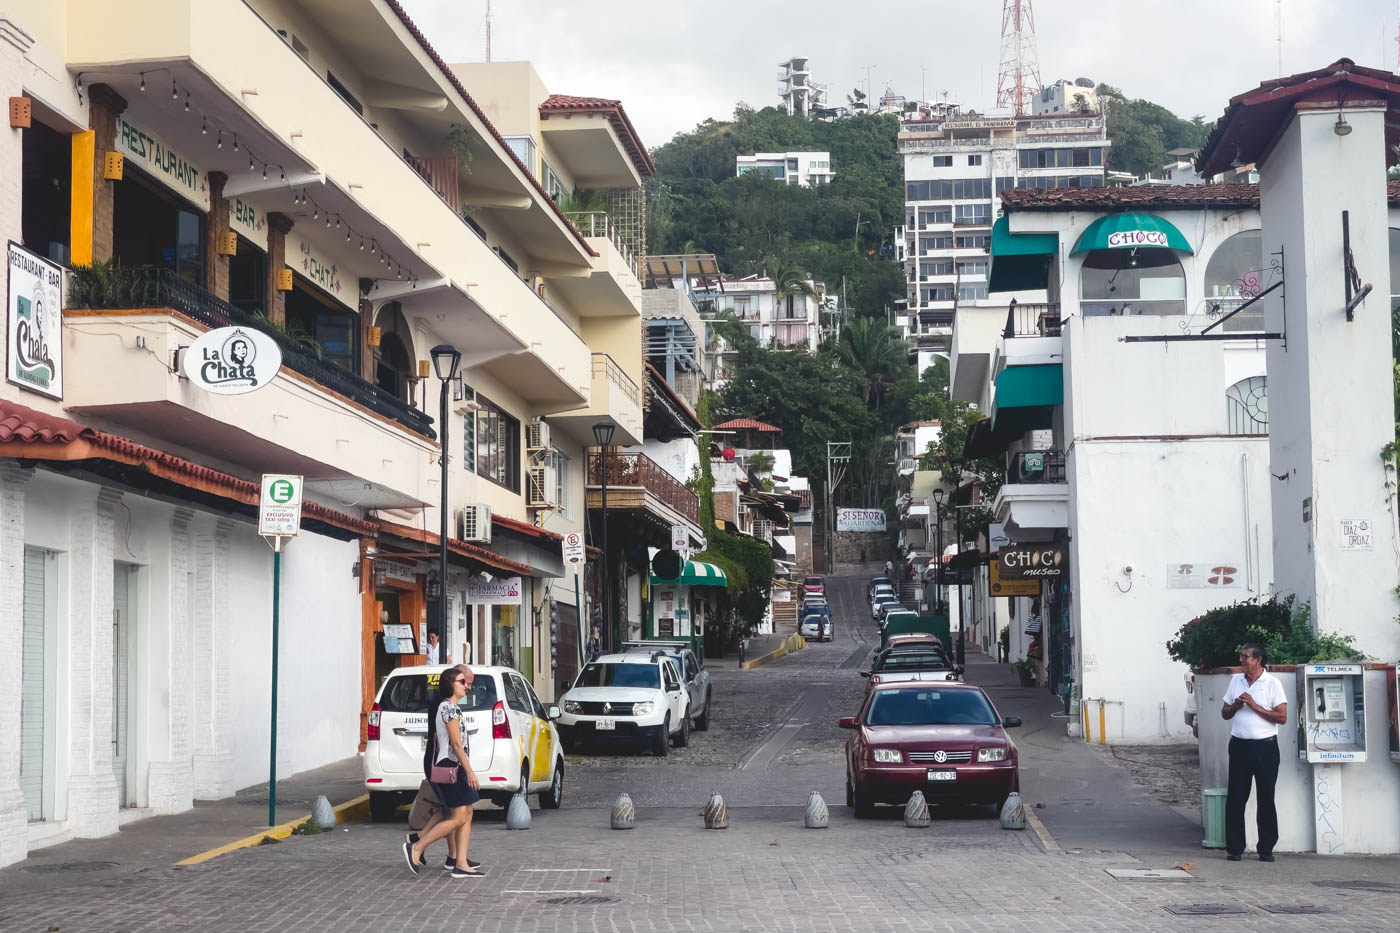 A view over a side street of Puerto Vallarta leading up a hill beside the choco museum.